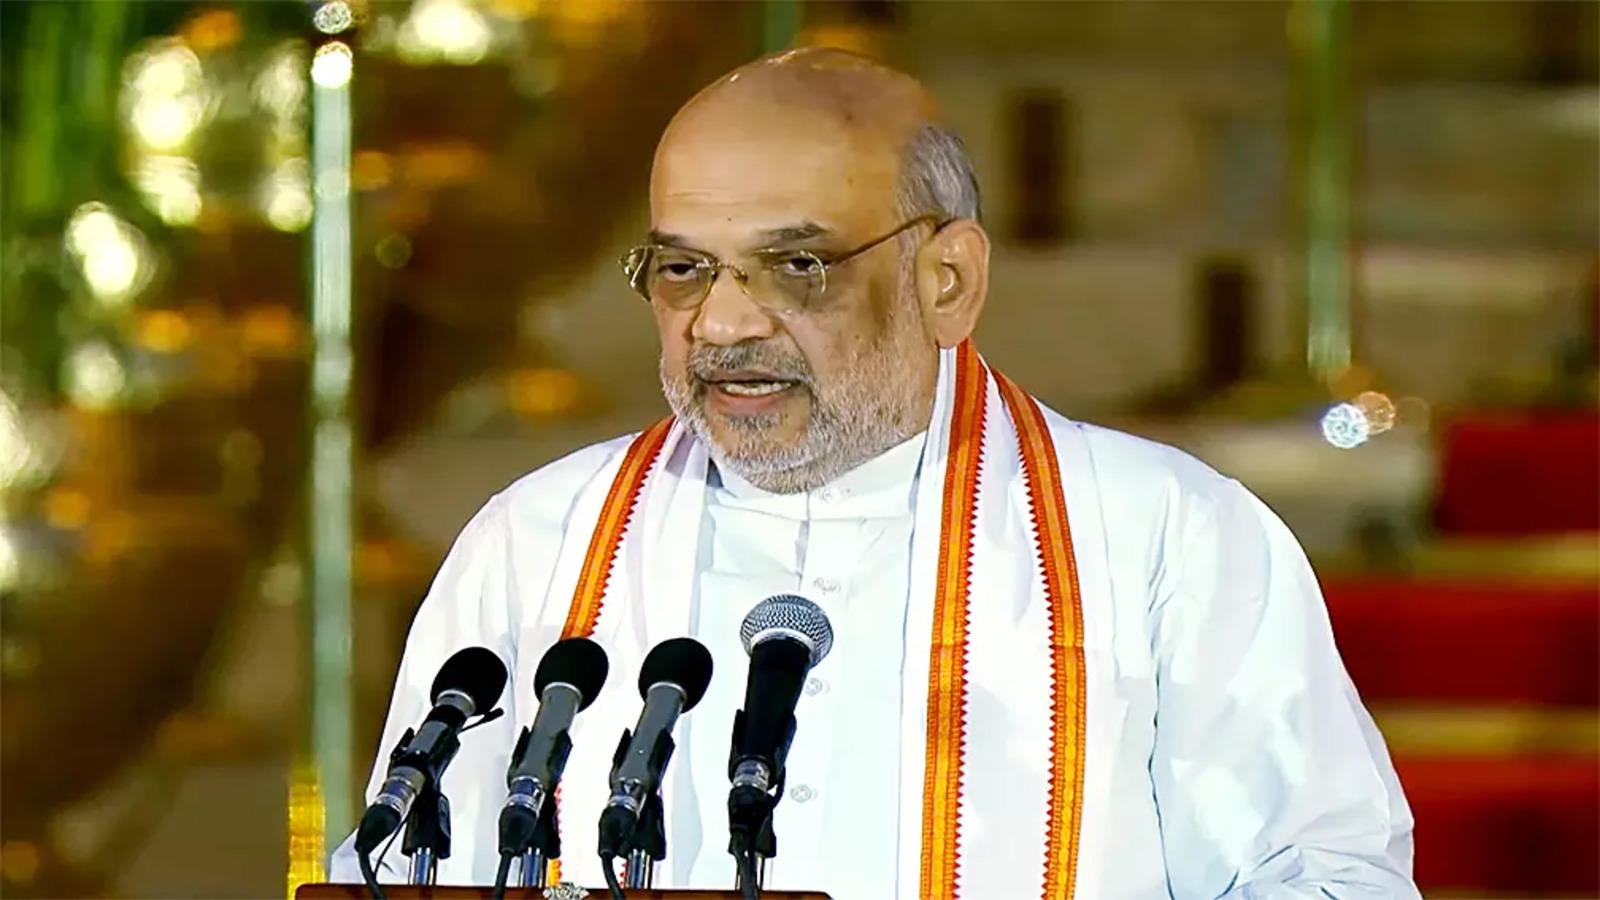 Amit Shah Assumes His Second Term As Union Home Minister